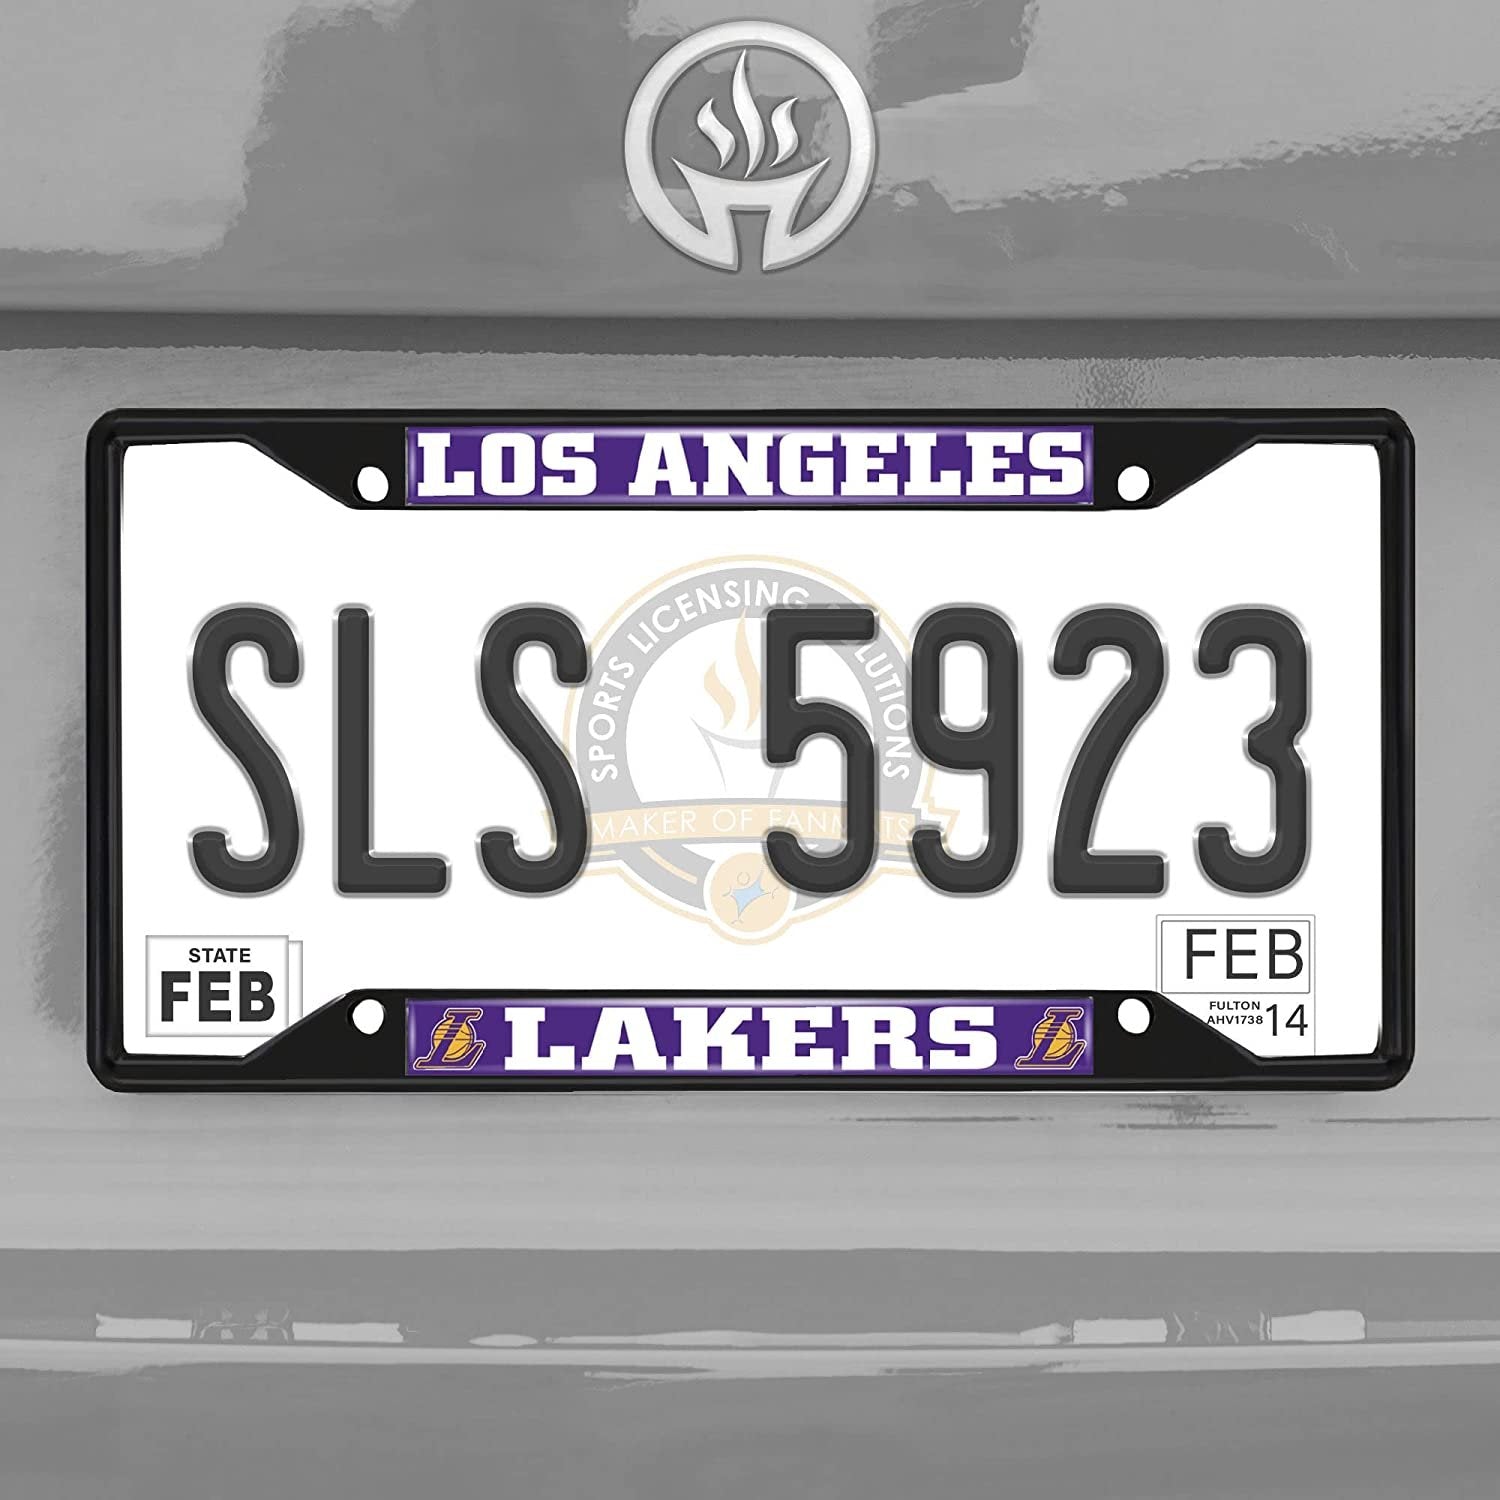 Los Angeles Lakers Black Metal License Plate Frame Tag Cover, 6x12 Inch